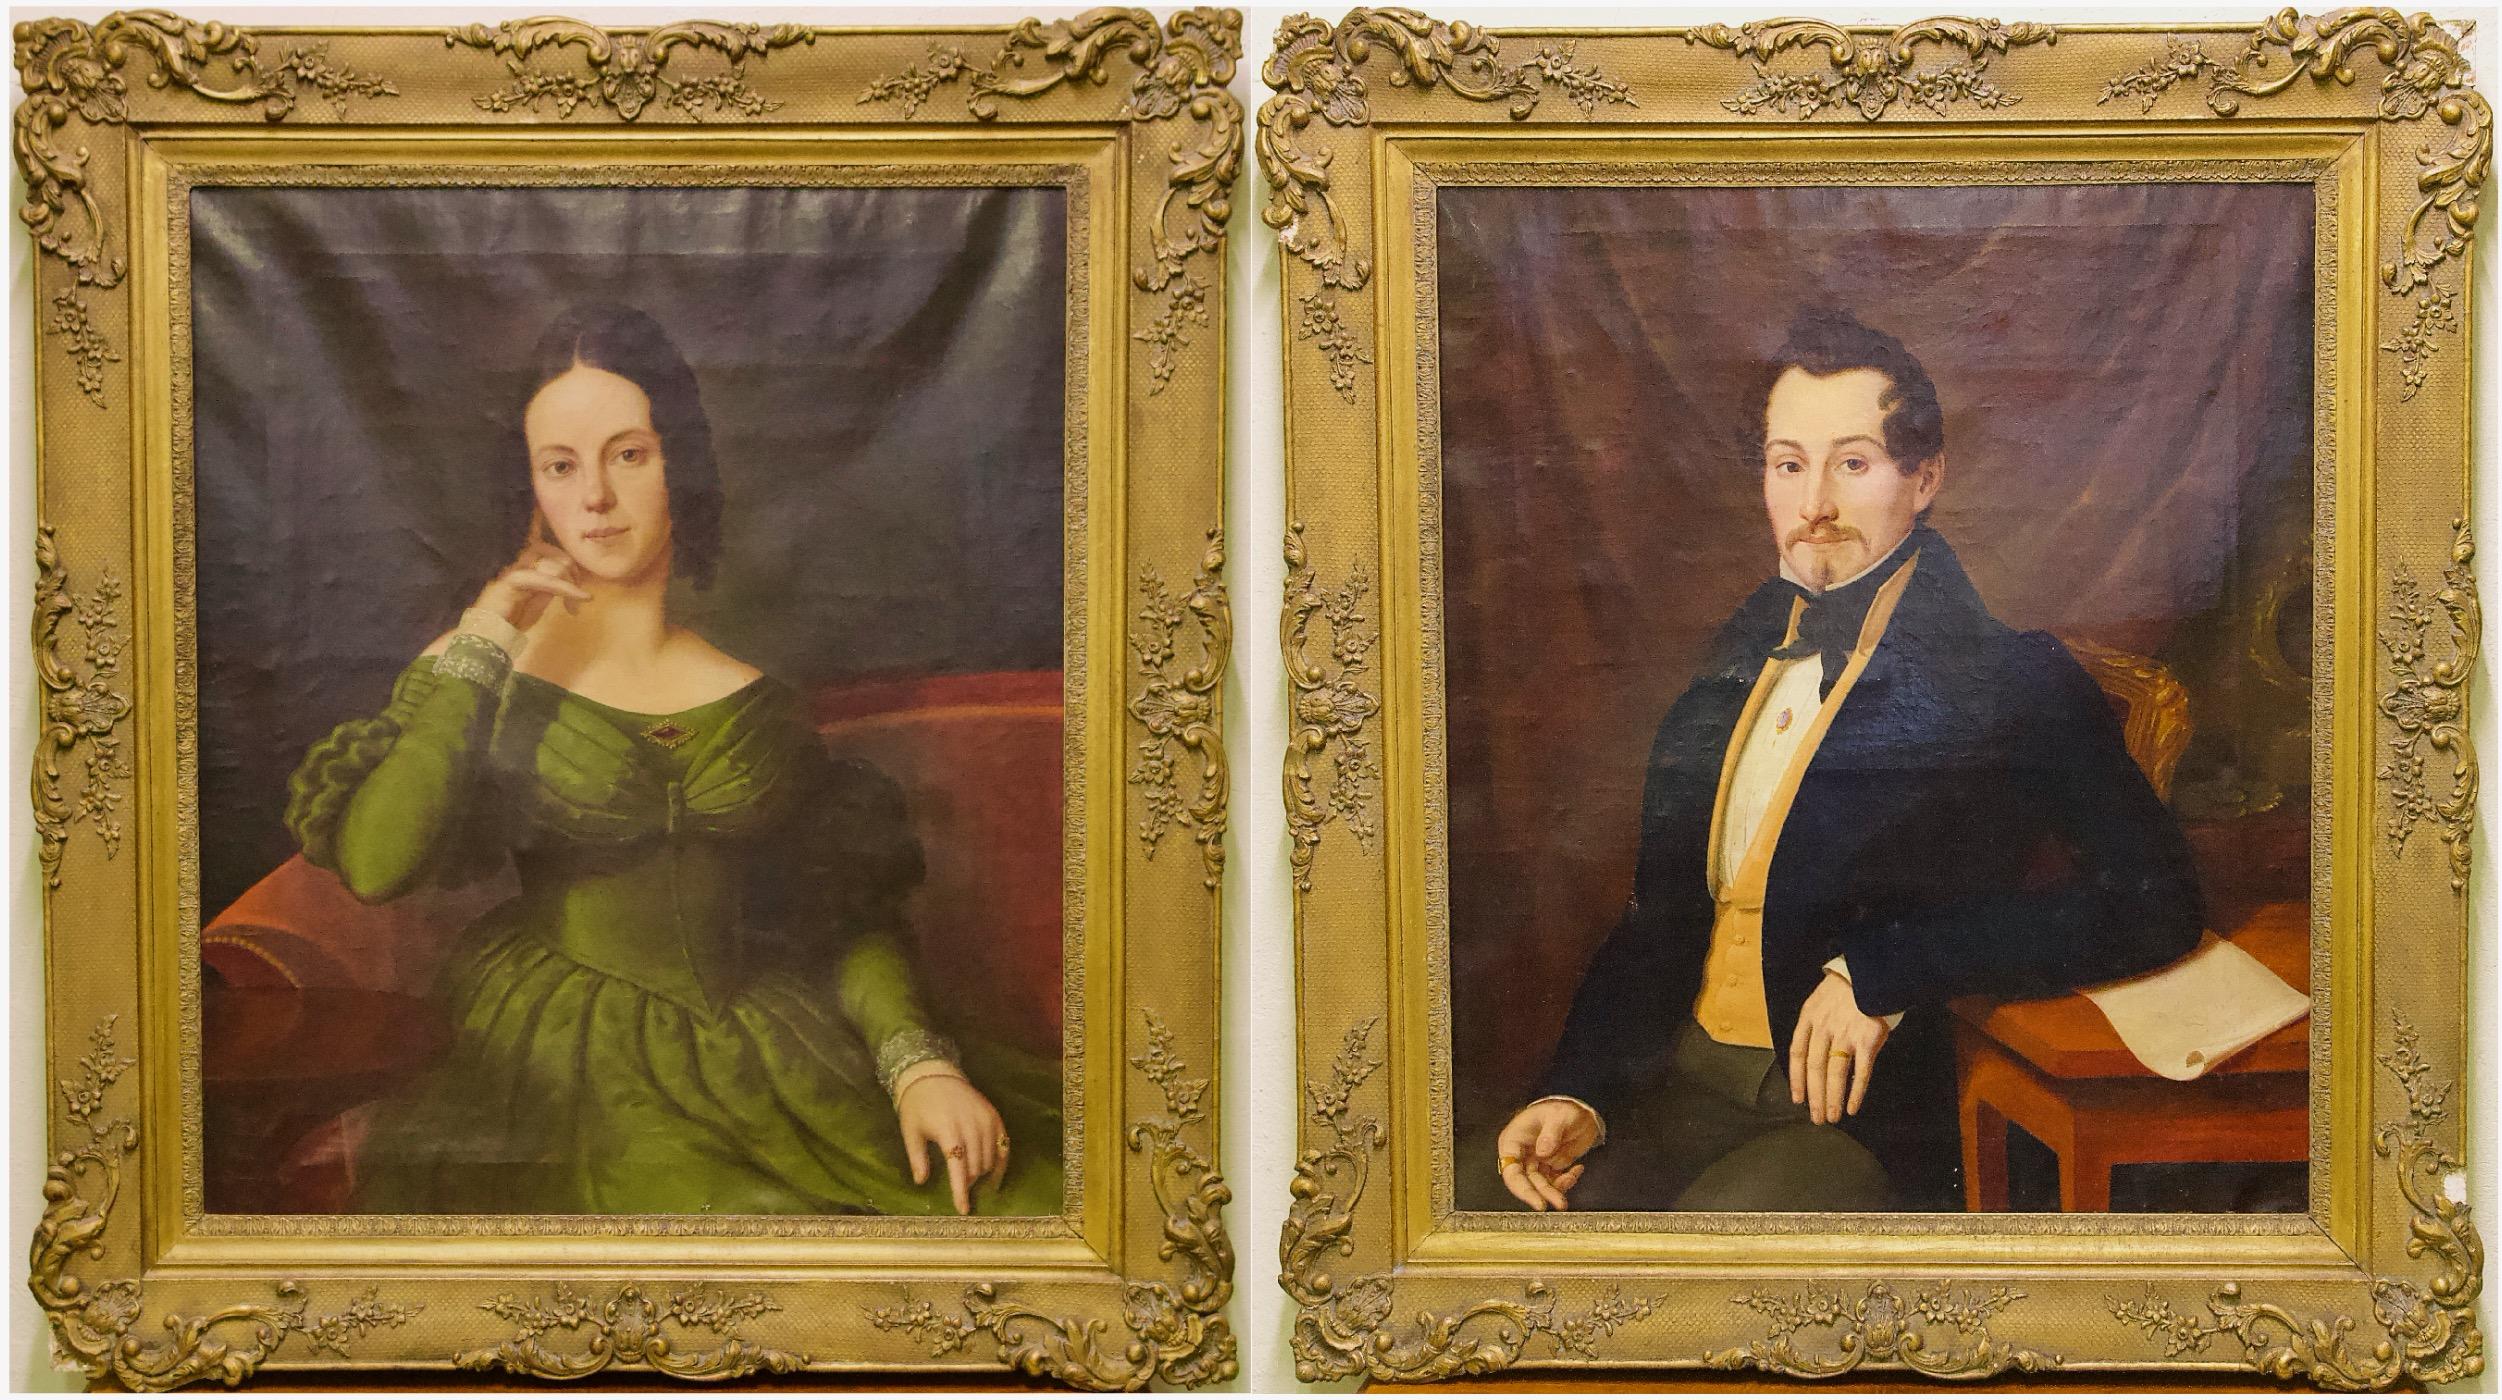 Pair of Antique Paintings, Oil on Canvas, Portraits. Around 1850. 